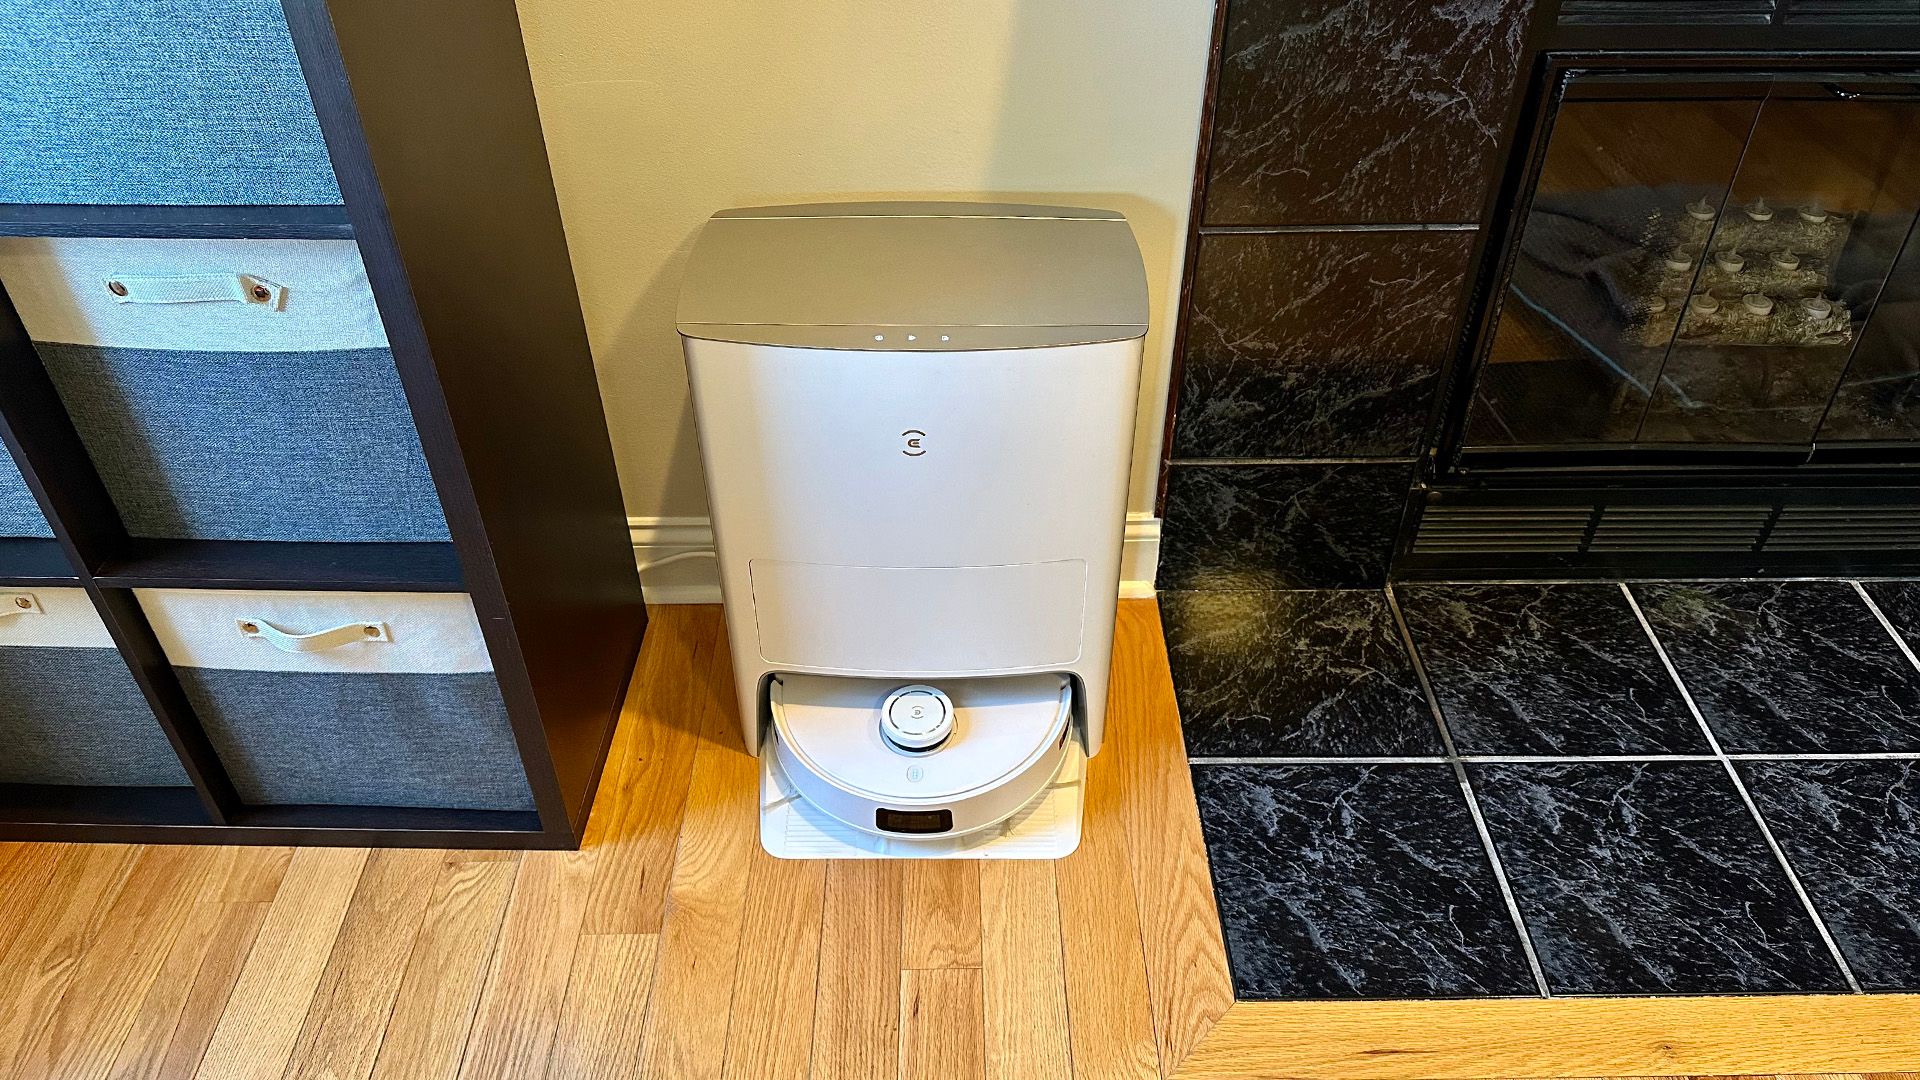 DEEBOT T10 OMNI between a fireplace and storage bins